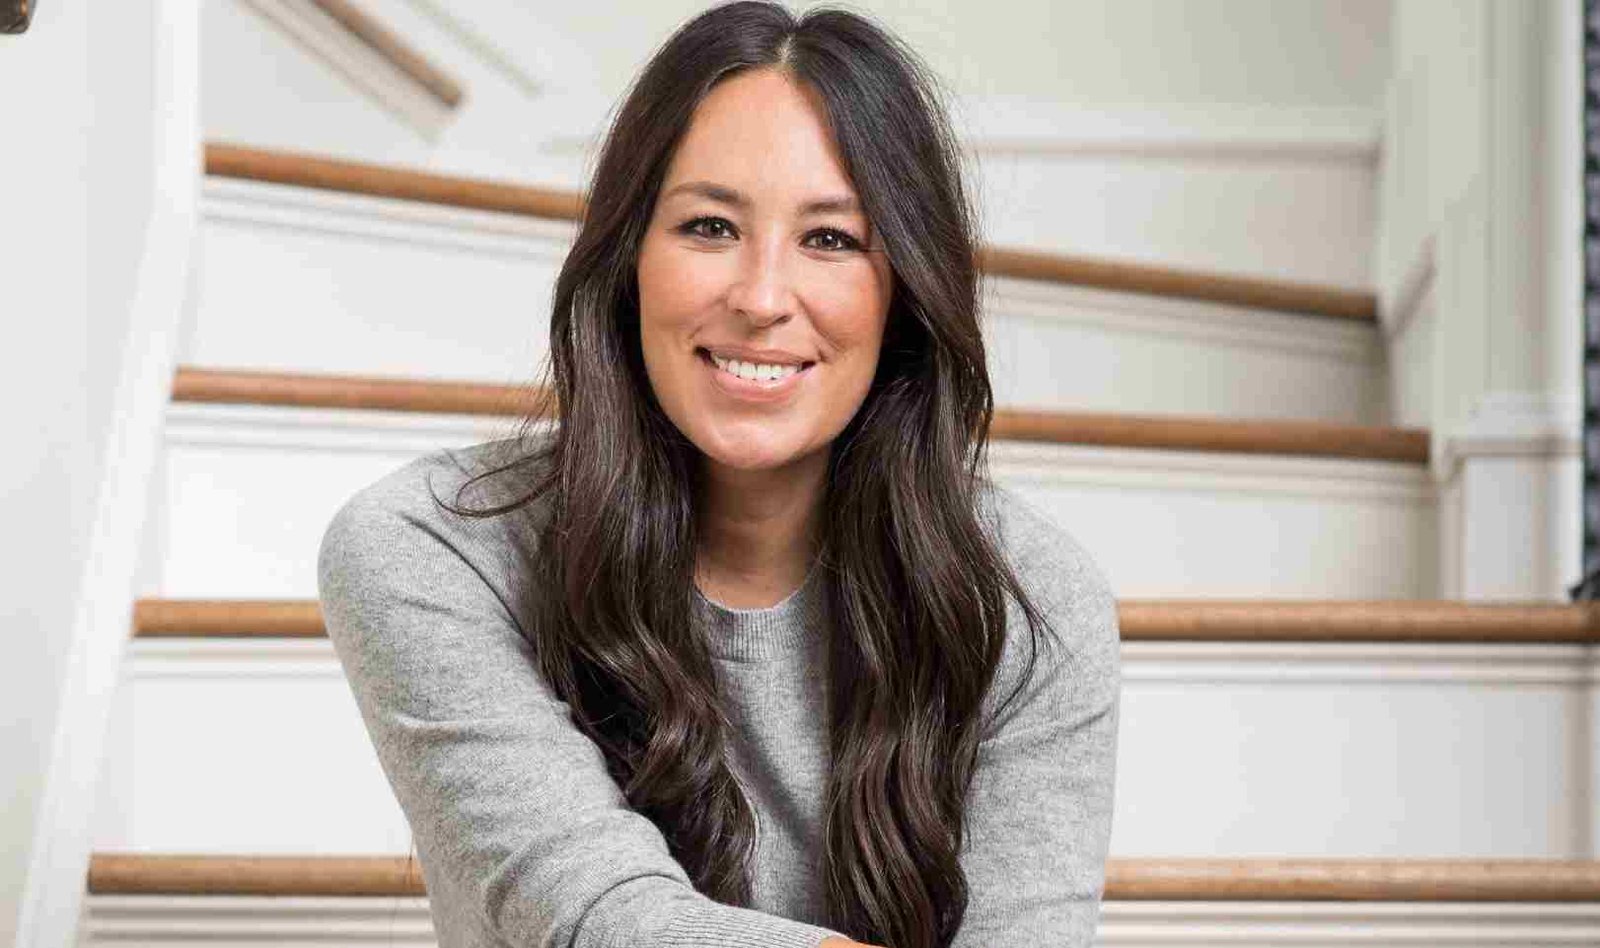 New York Times bestselling author, Joanna Gaines